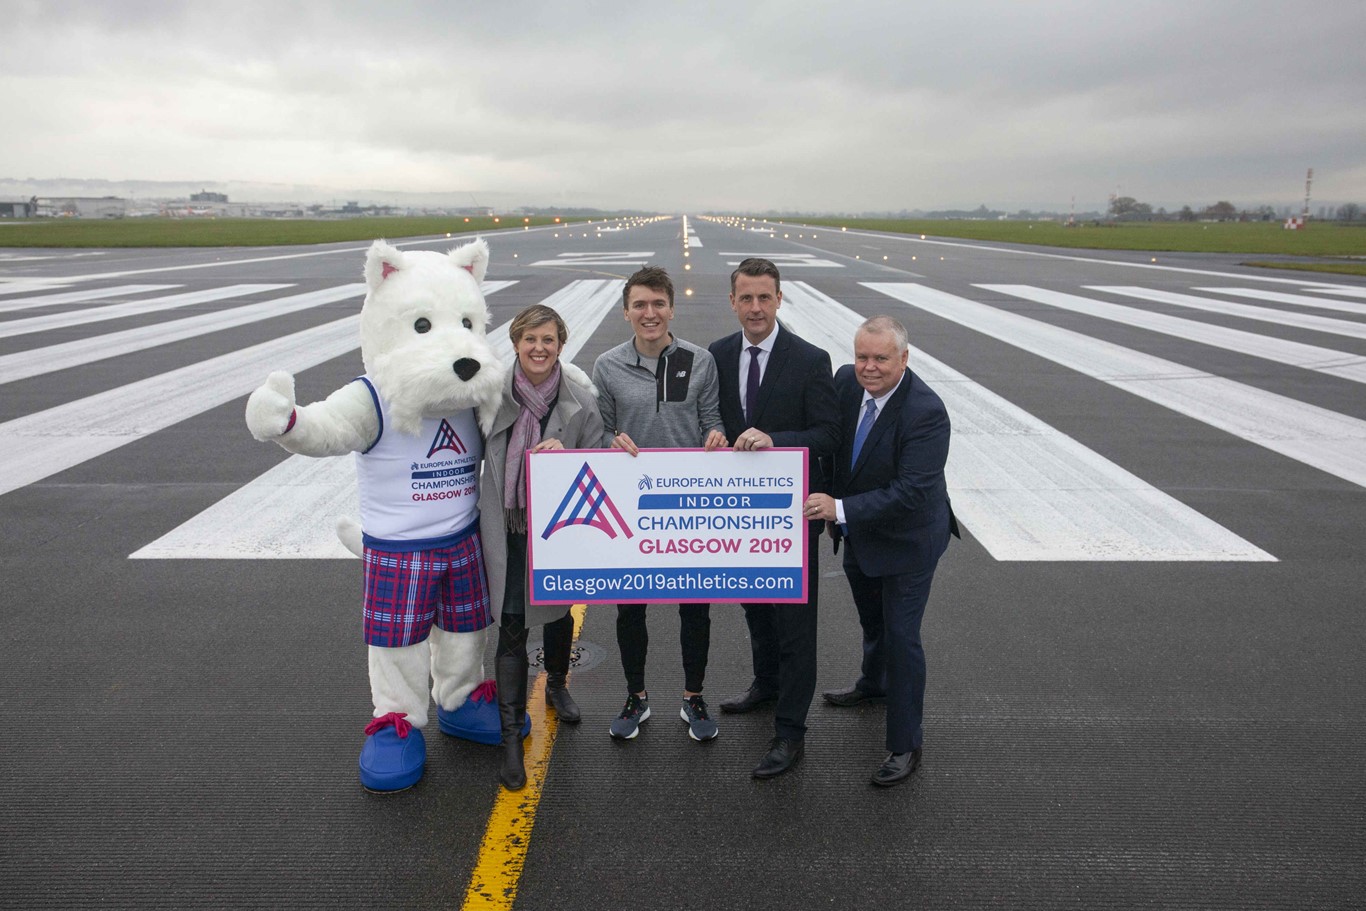 Airport lands partnership with European Athletics Indoor Championships Glasgow 2019